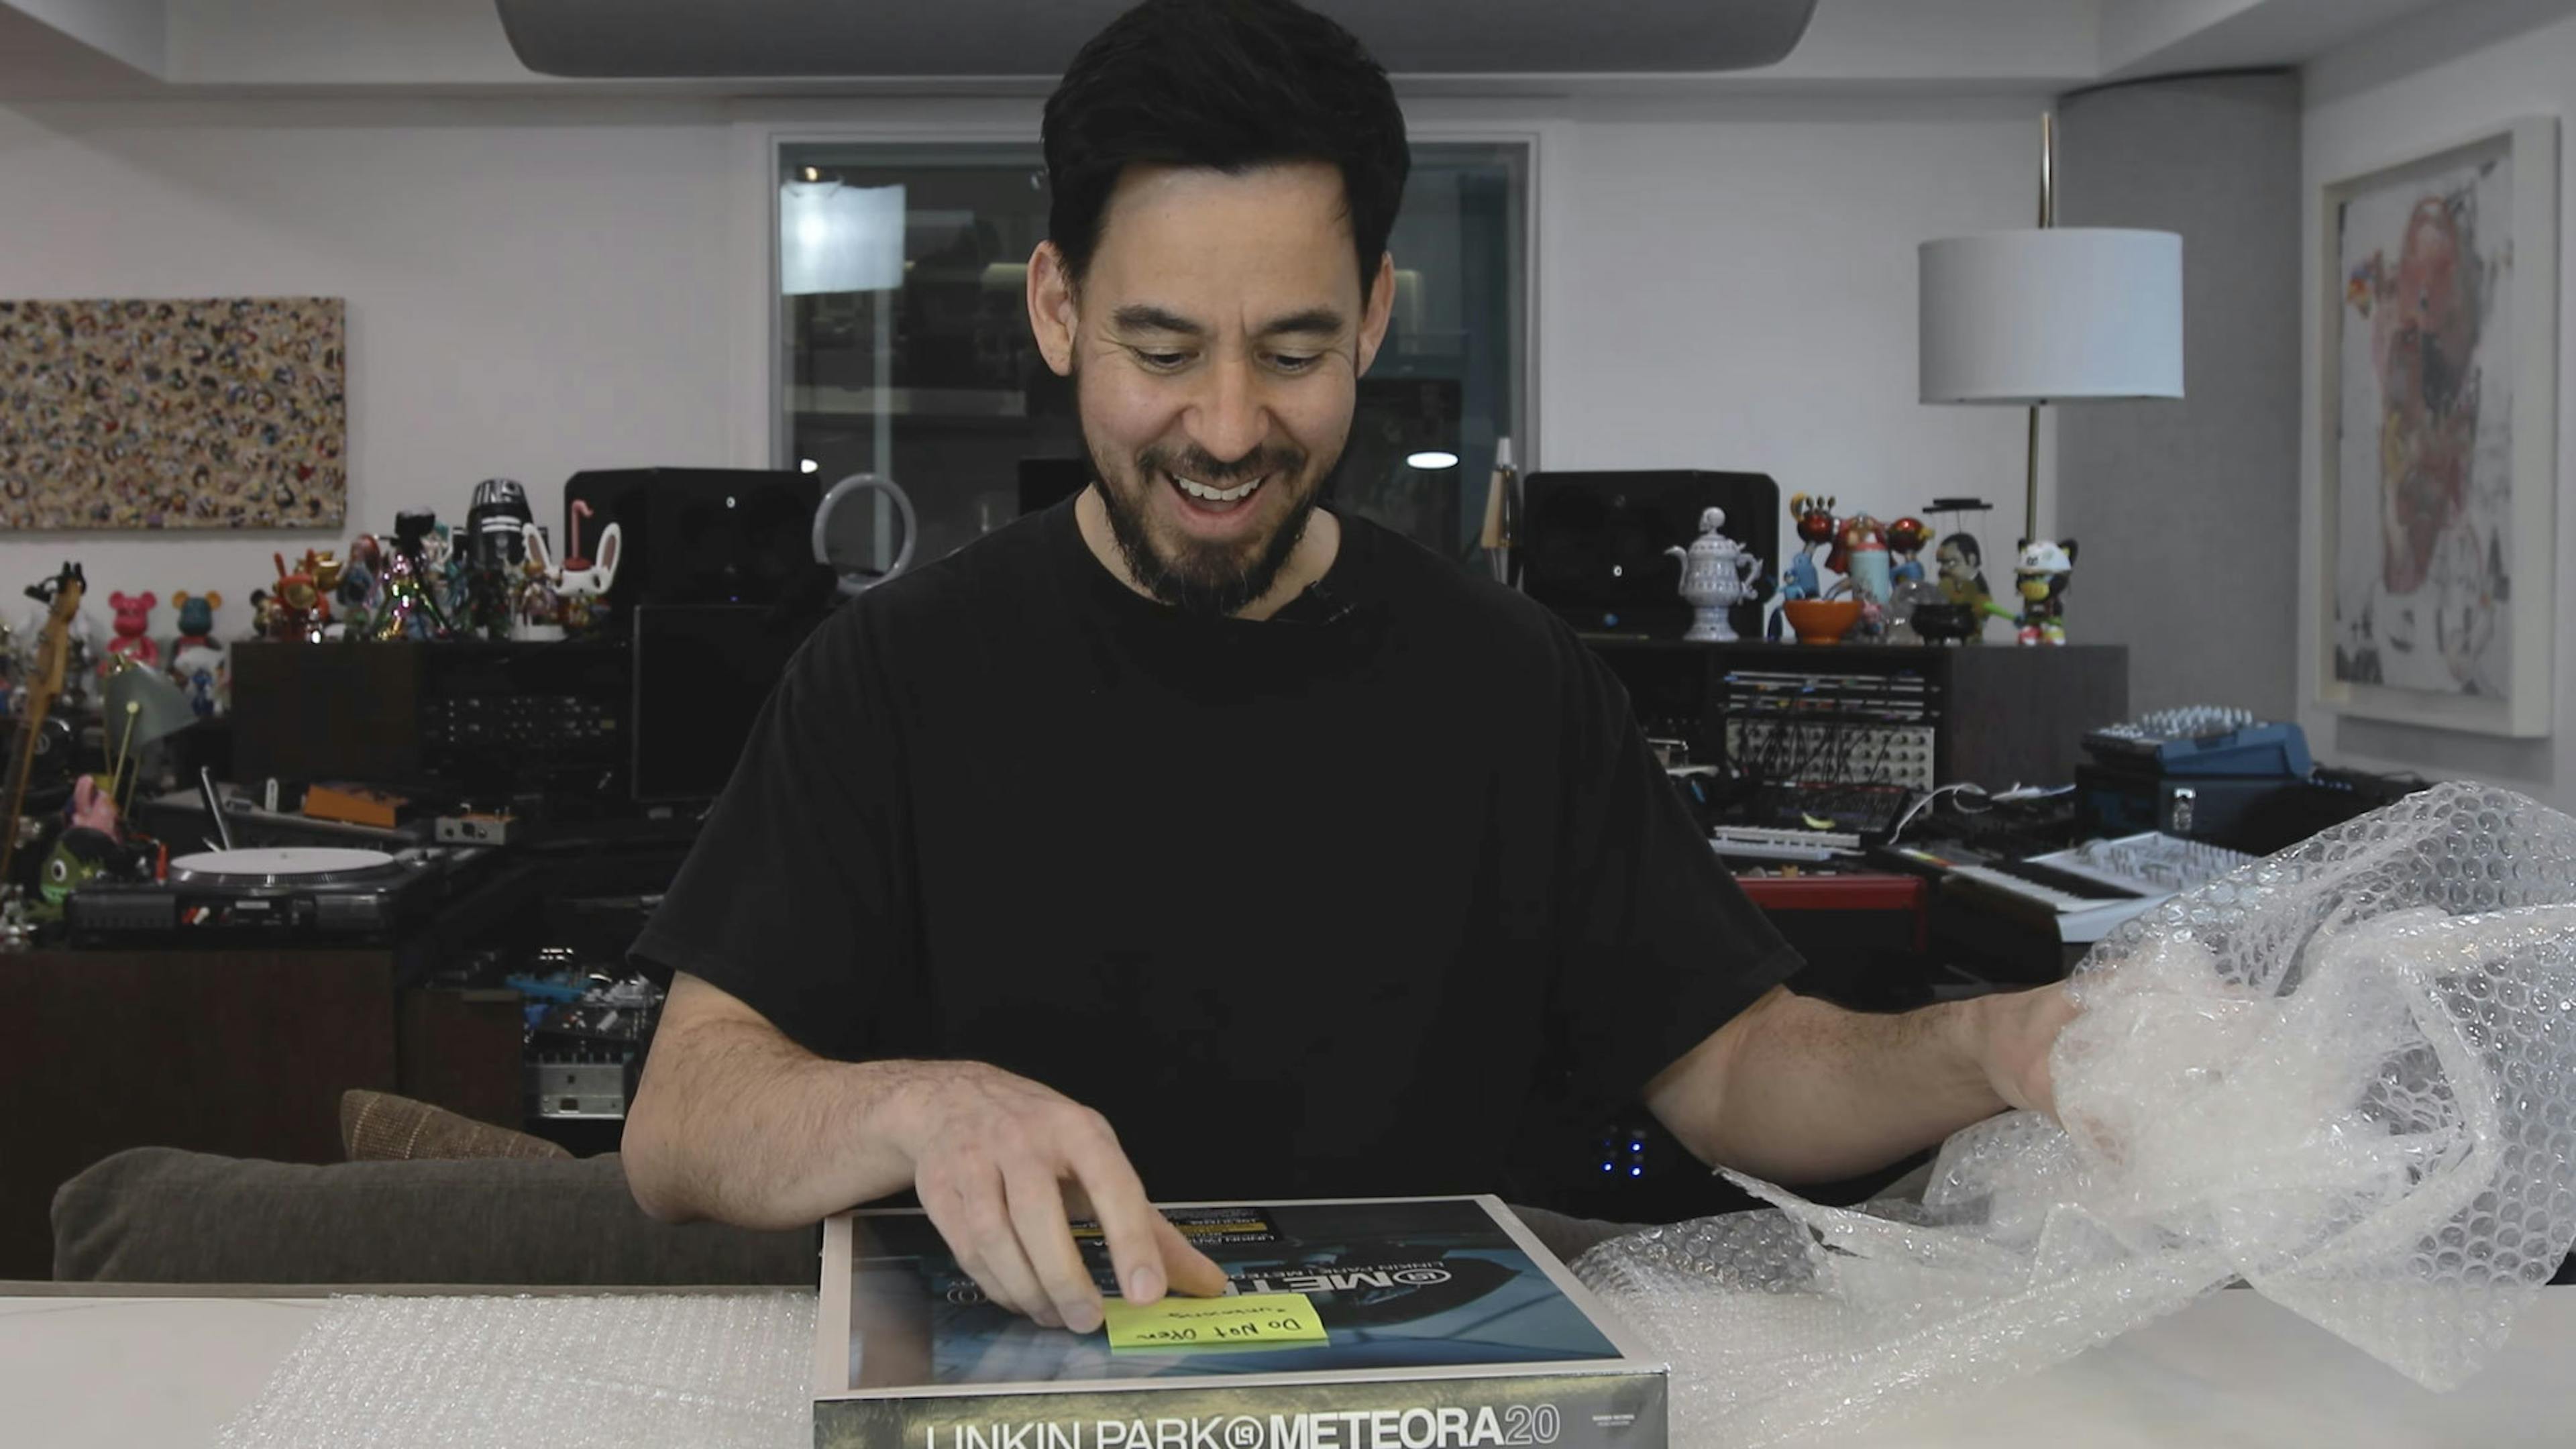 See Mike Shinoda unboxing Linkin Park’s epic new Meteora boxset